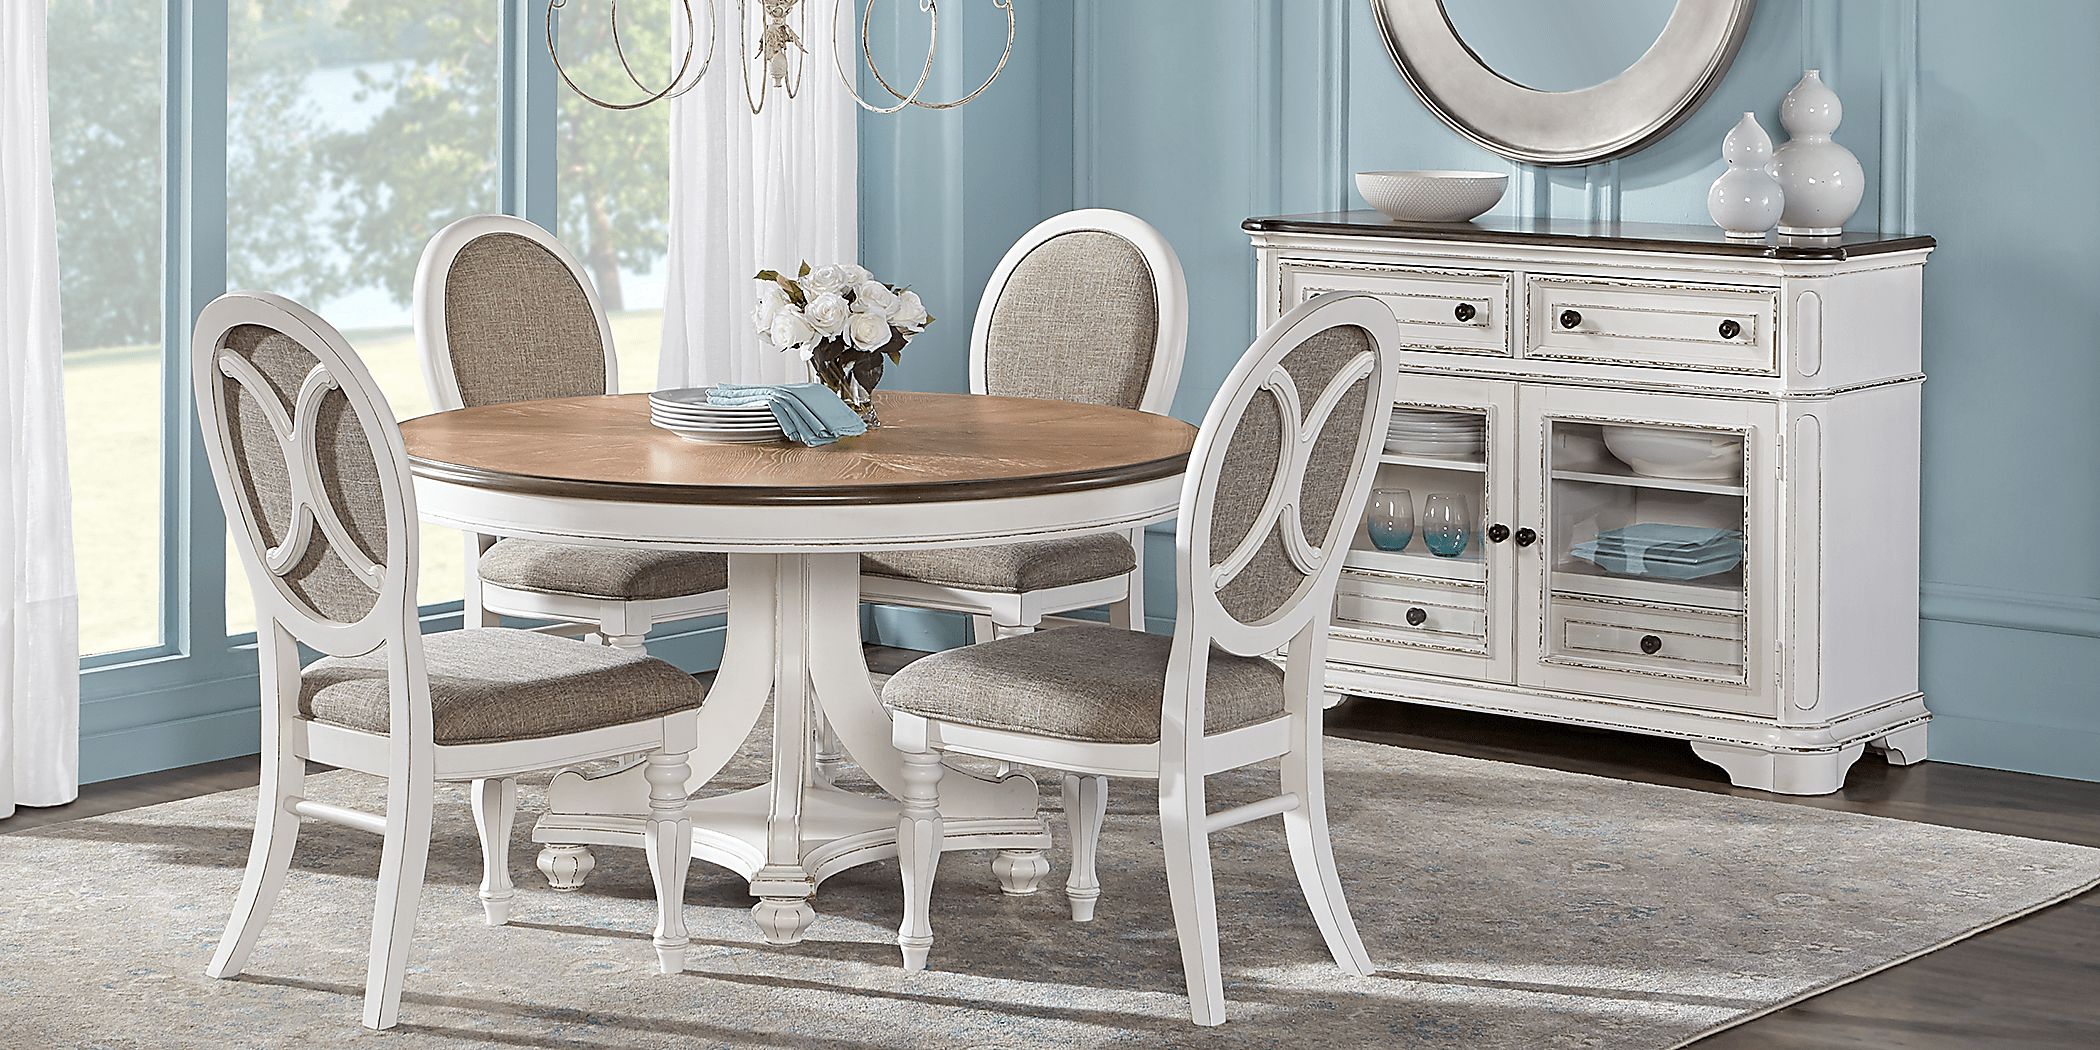 https://assets.roomstogo.com/product/french-market-white-5-pc-round-dining-room_4228738P_image-room?cache-id=d744c2bdeea38e1284828b84cd5170b0